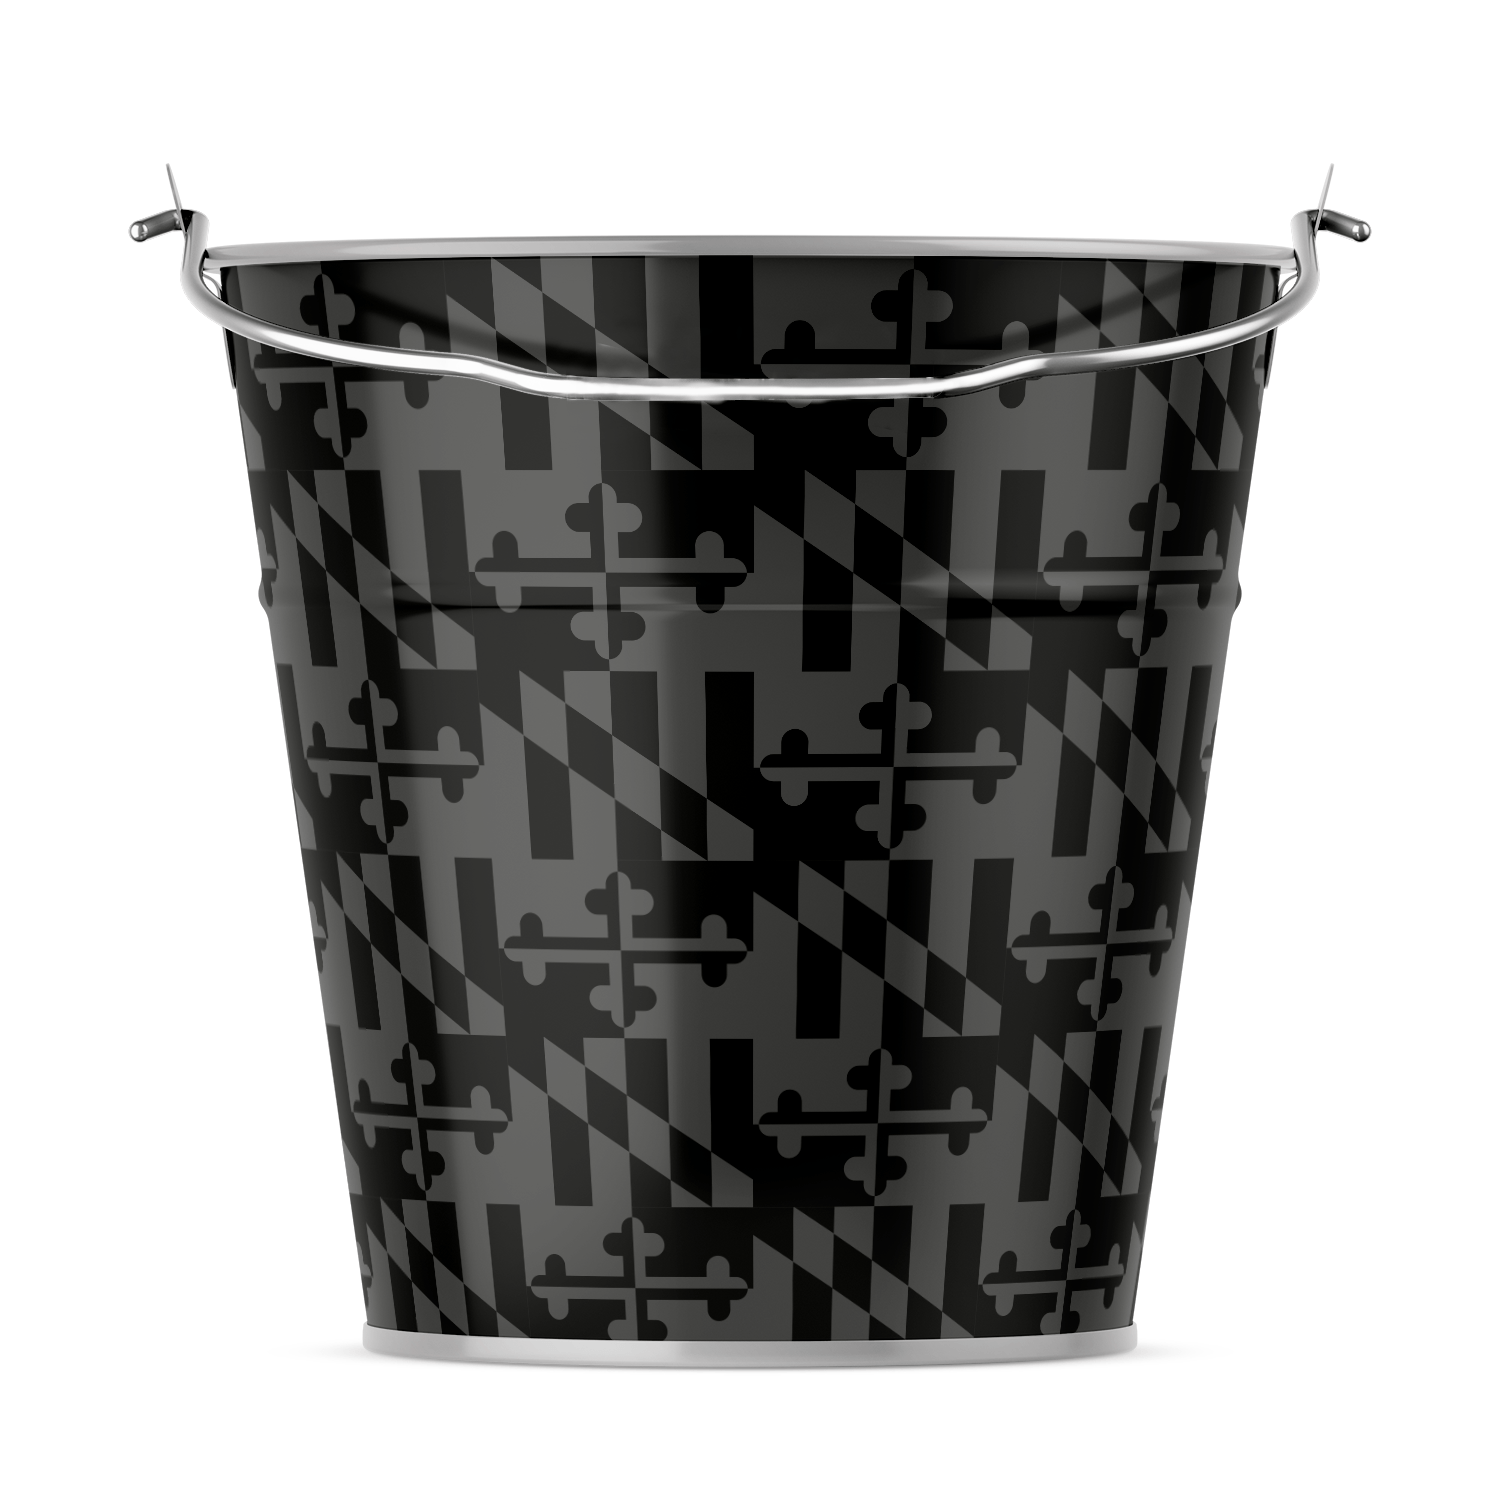 *PRE-ORDER* Greyscale Maryland Flag / Metal Bucket (Estimated Ship Date: 5/25) - Route One Apparel